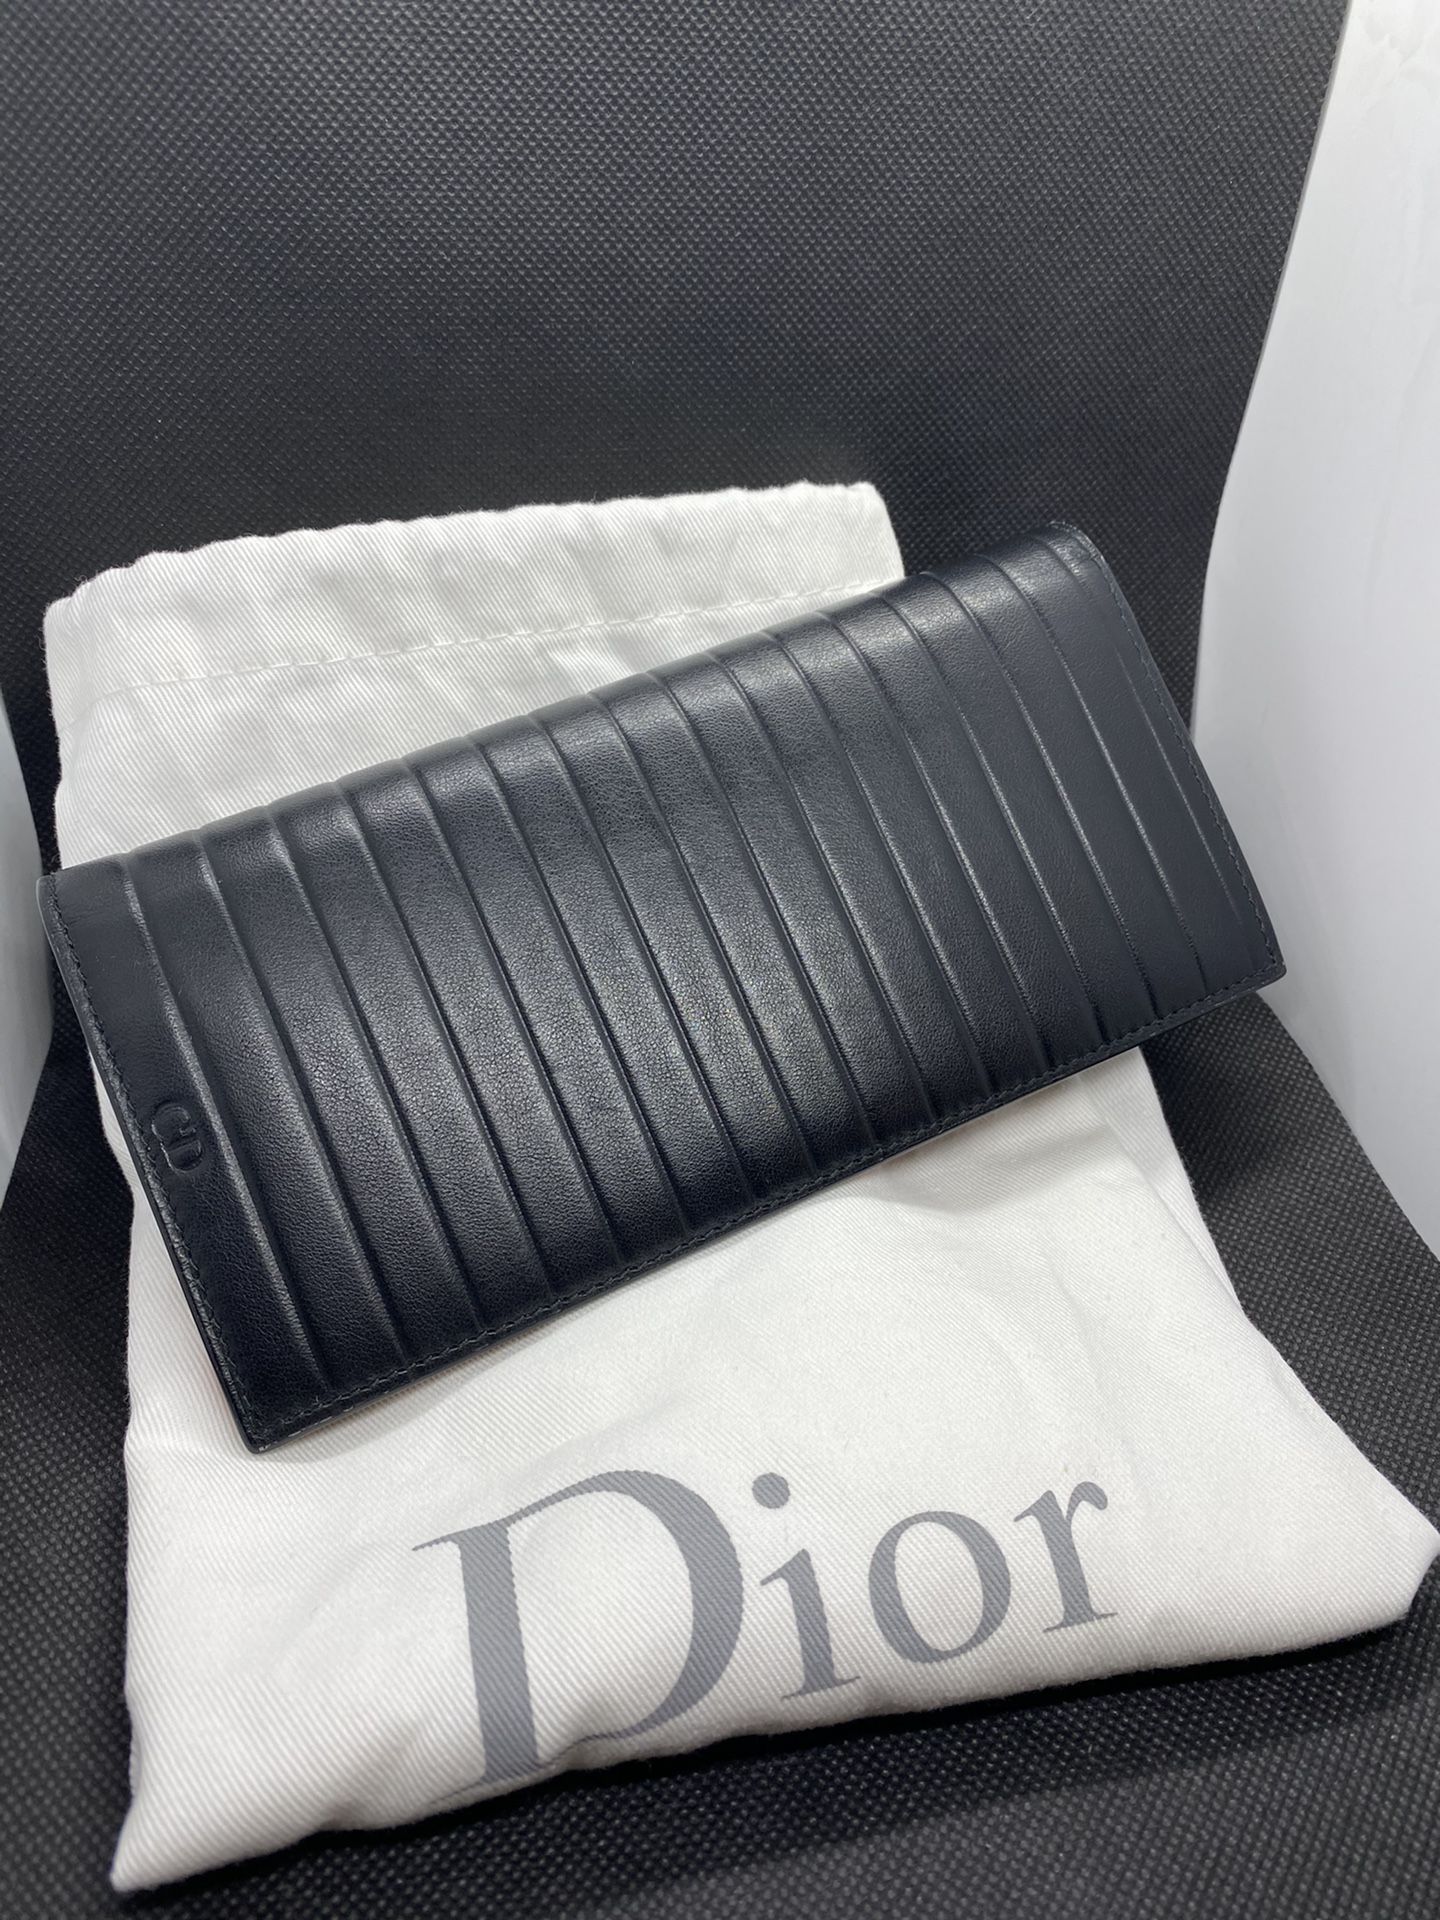 Authentic Christian Dior Wallet .